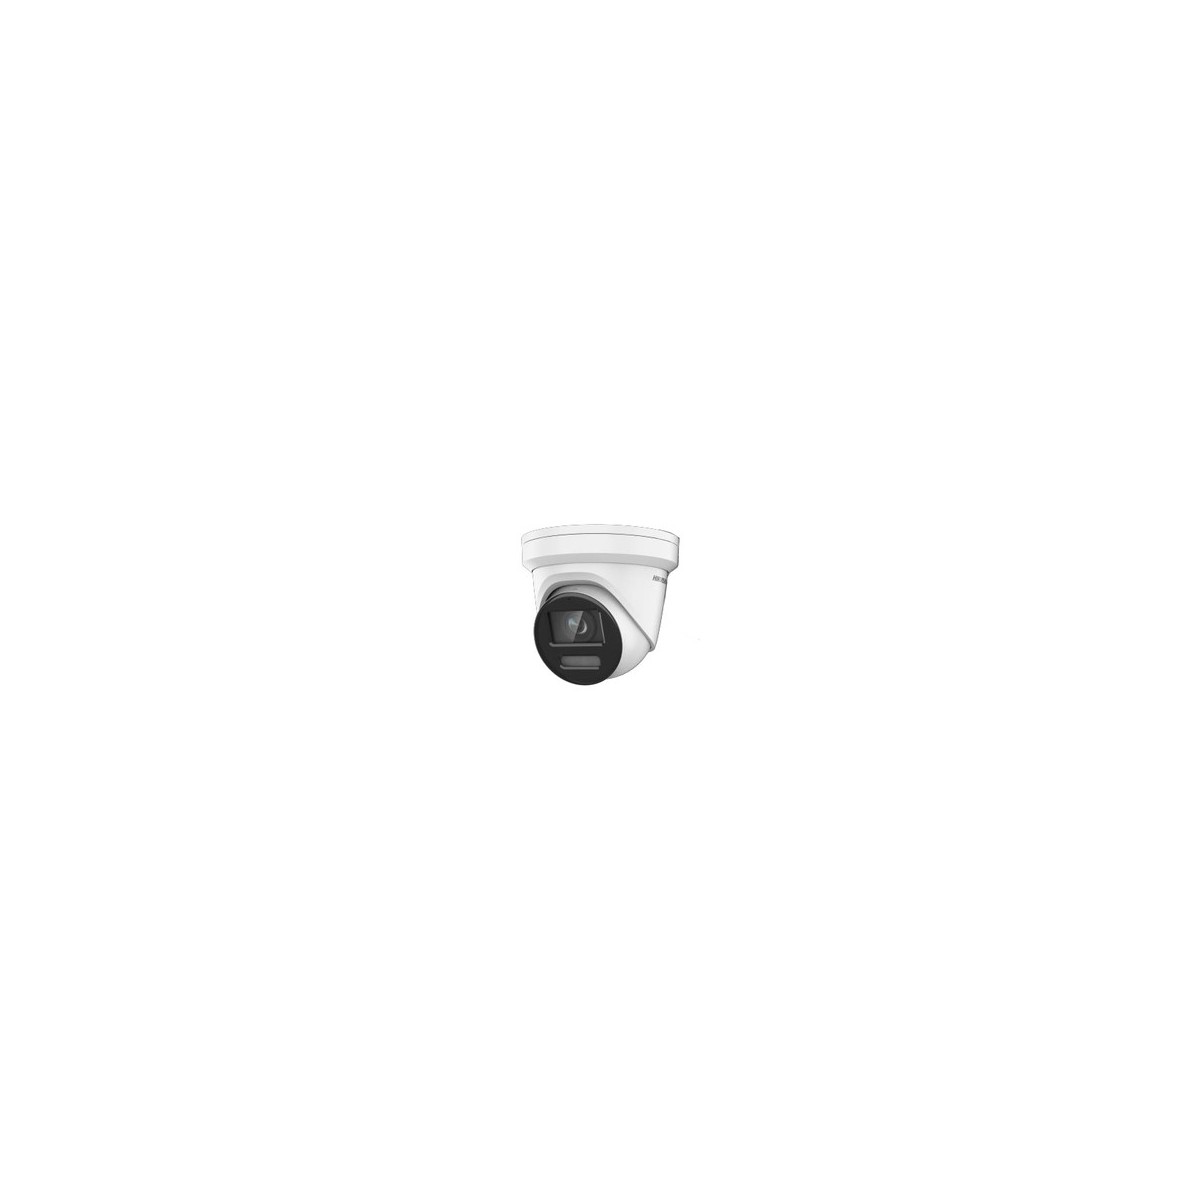 Hikvision Digital Technology DS-2CD2387G2-LU - IP security camera - Outdoor - Wired - Ceiling-wall - White - Turret